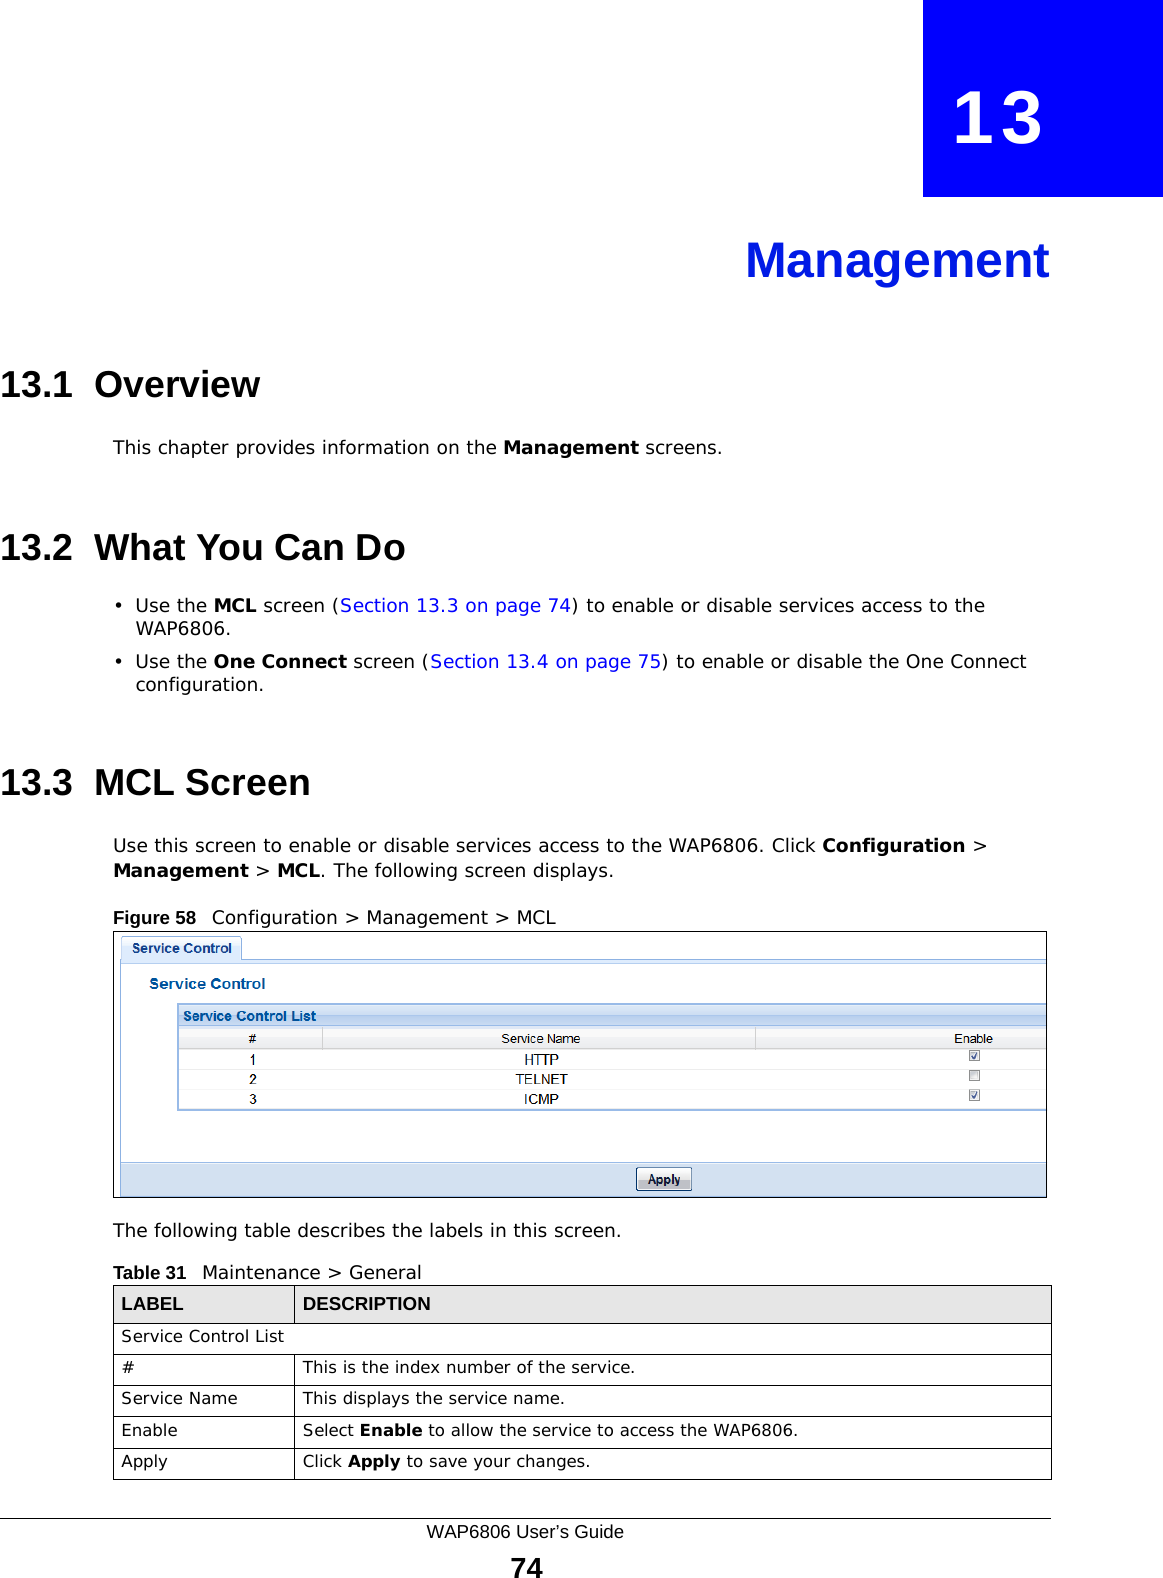 WAP6806 User’s Guide74CHAPTER   13Management13.1  OverviewThis chapter provides information on the Management screens. 13.2  What You Can Do•Use the MCL screen (Section 13.3 on page 74) to enable or disable services access to the WAP6806. •Use the One Connect screen (Section 13.4 on page 75) to enable or disable the One Connect configuration.13.3  MCL Screen Use this screen to enable or disable services access to the WAP6806. Click Configuration &gt; Management &gt; MCL. The following screen displays.Figure 58   Configuration &gt; Management &gt; MCL The following table describes the labels in this screen.Table 31   Maintenance &gt; GeneralLABEL DESCRIPTIONService Control List#This is the index number of the service.Service Name This displays the service name.Enable Select Enable to allow the service to access the WAP6806.Apply Click Apply to save your changes.